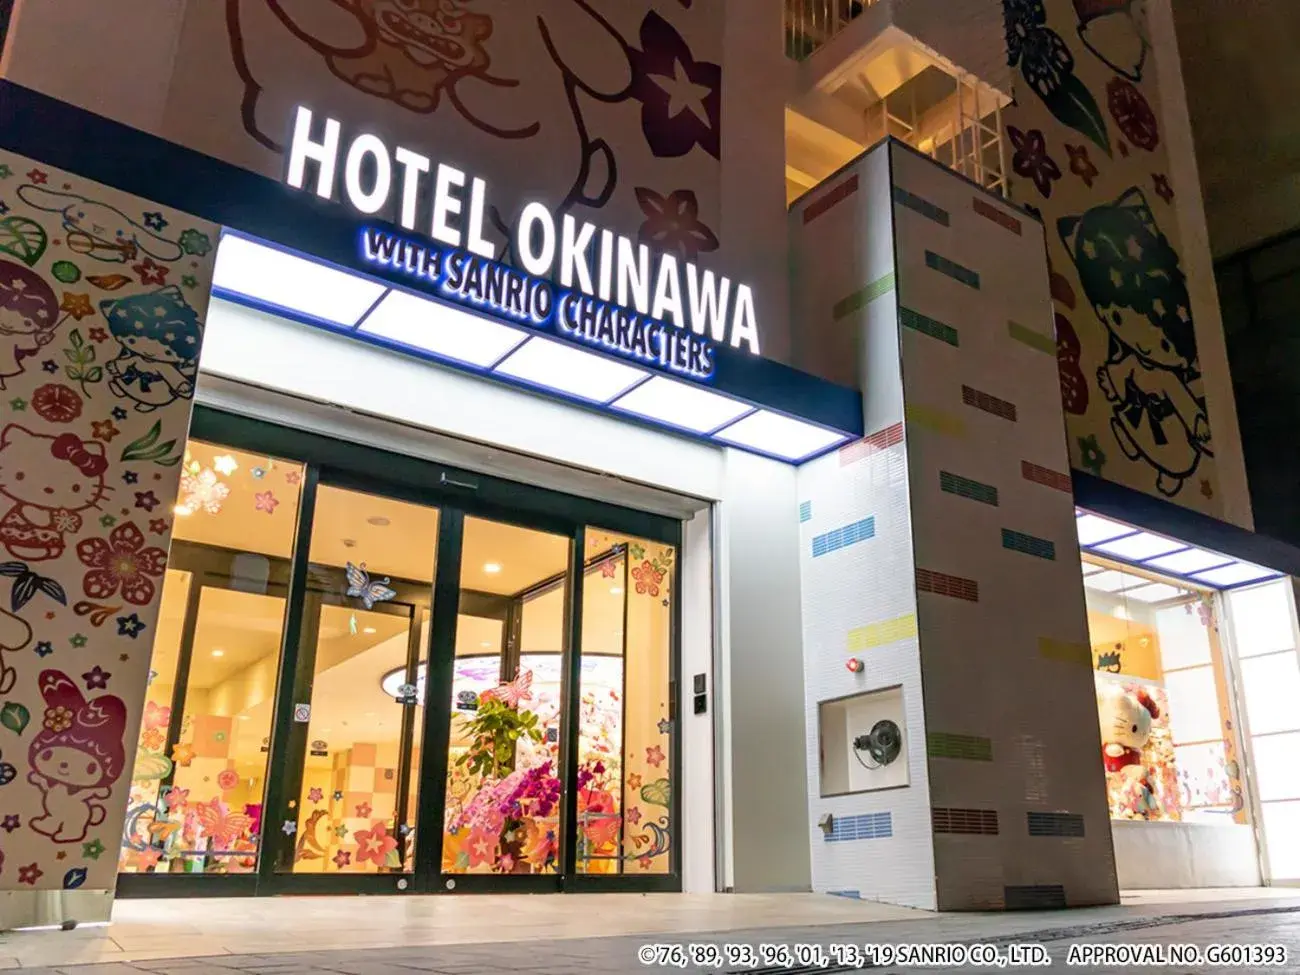 Facade/entrance in Hotel Okinawa With Sanrio Characters